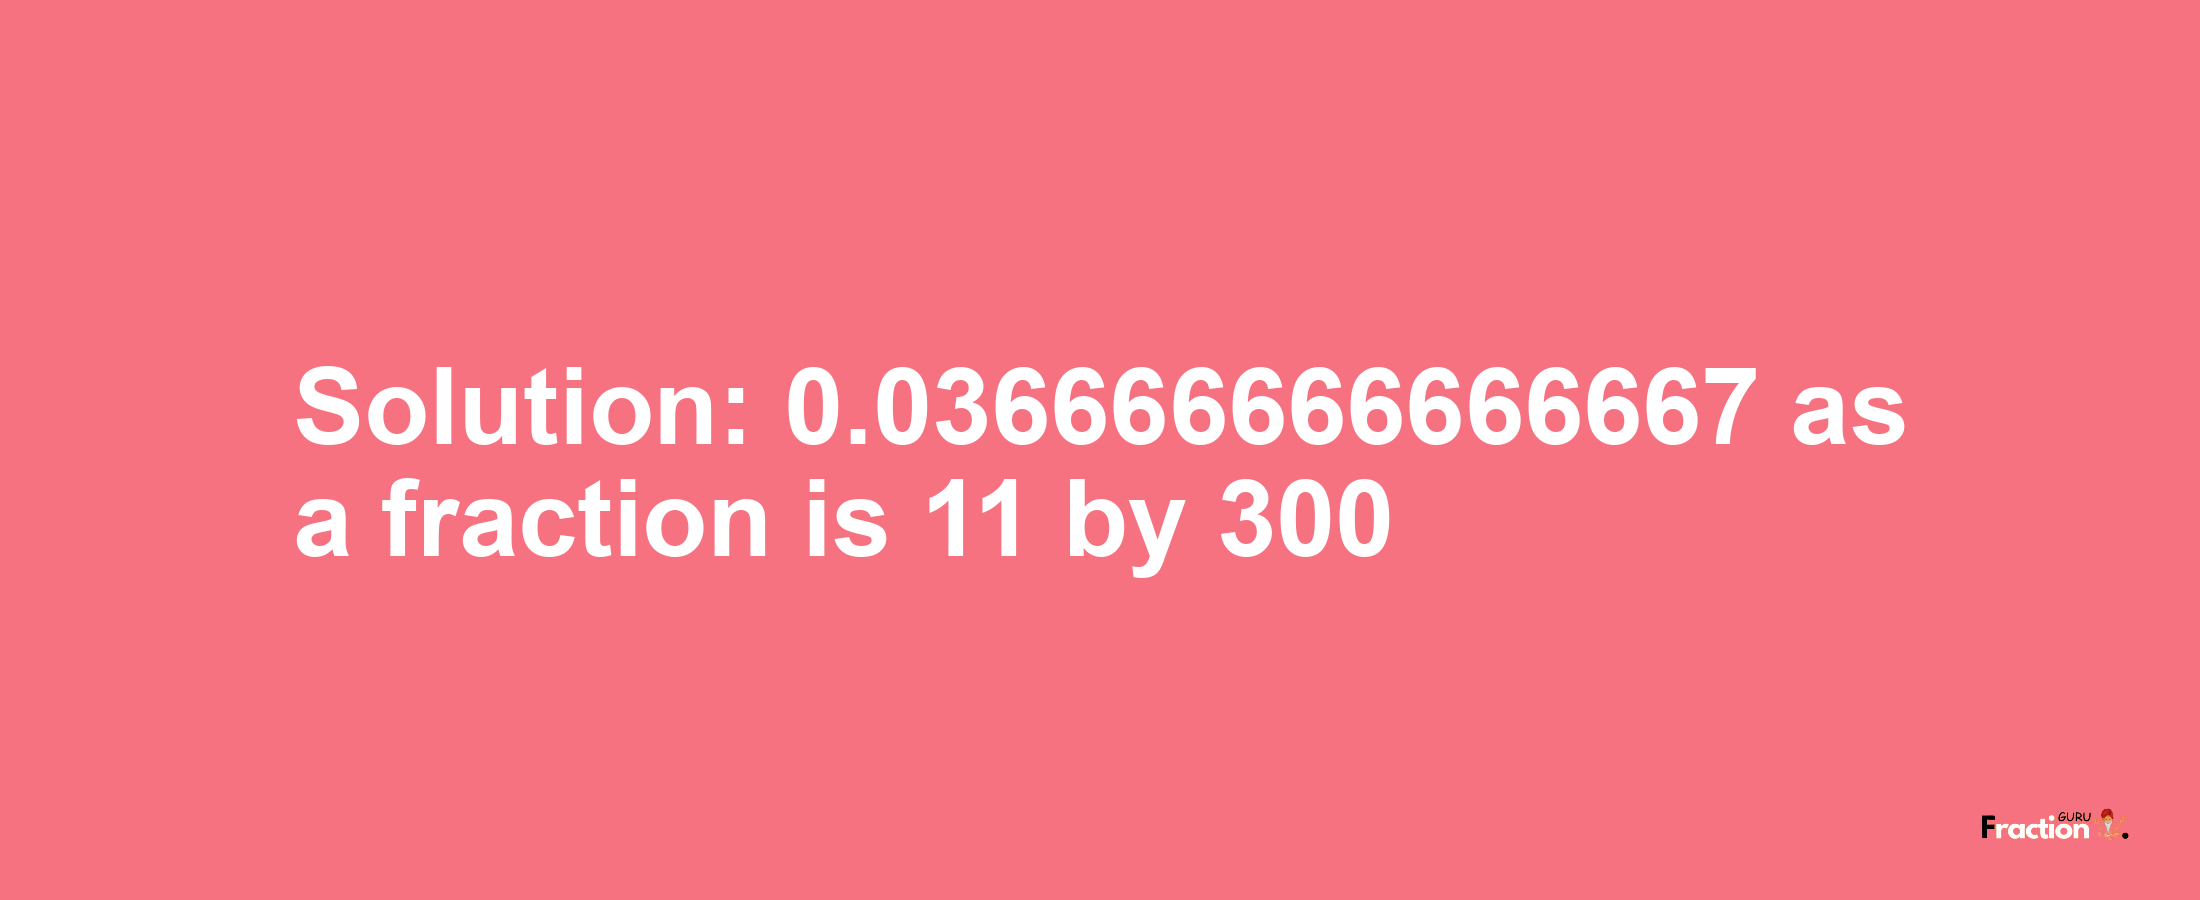 Solution:0.036666666666667 as a fraction is 11/300